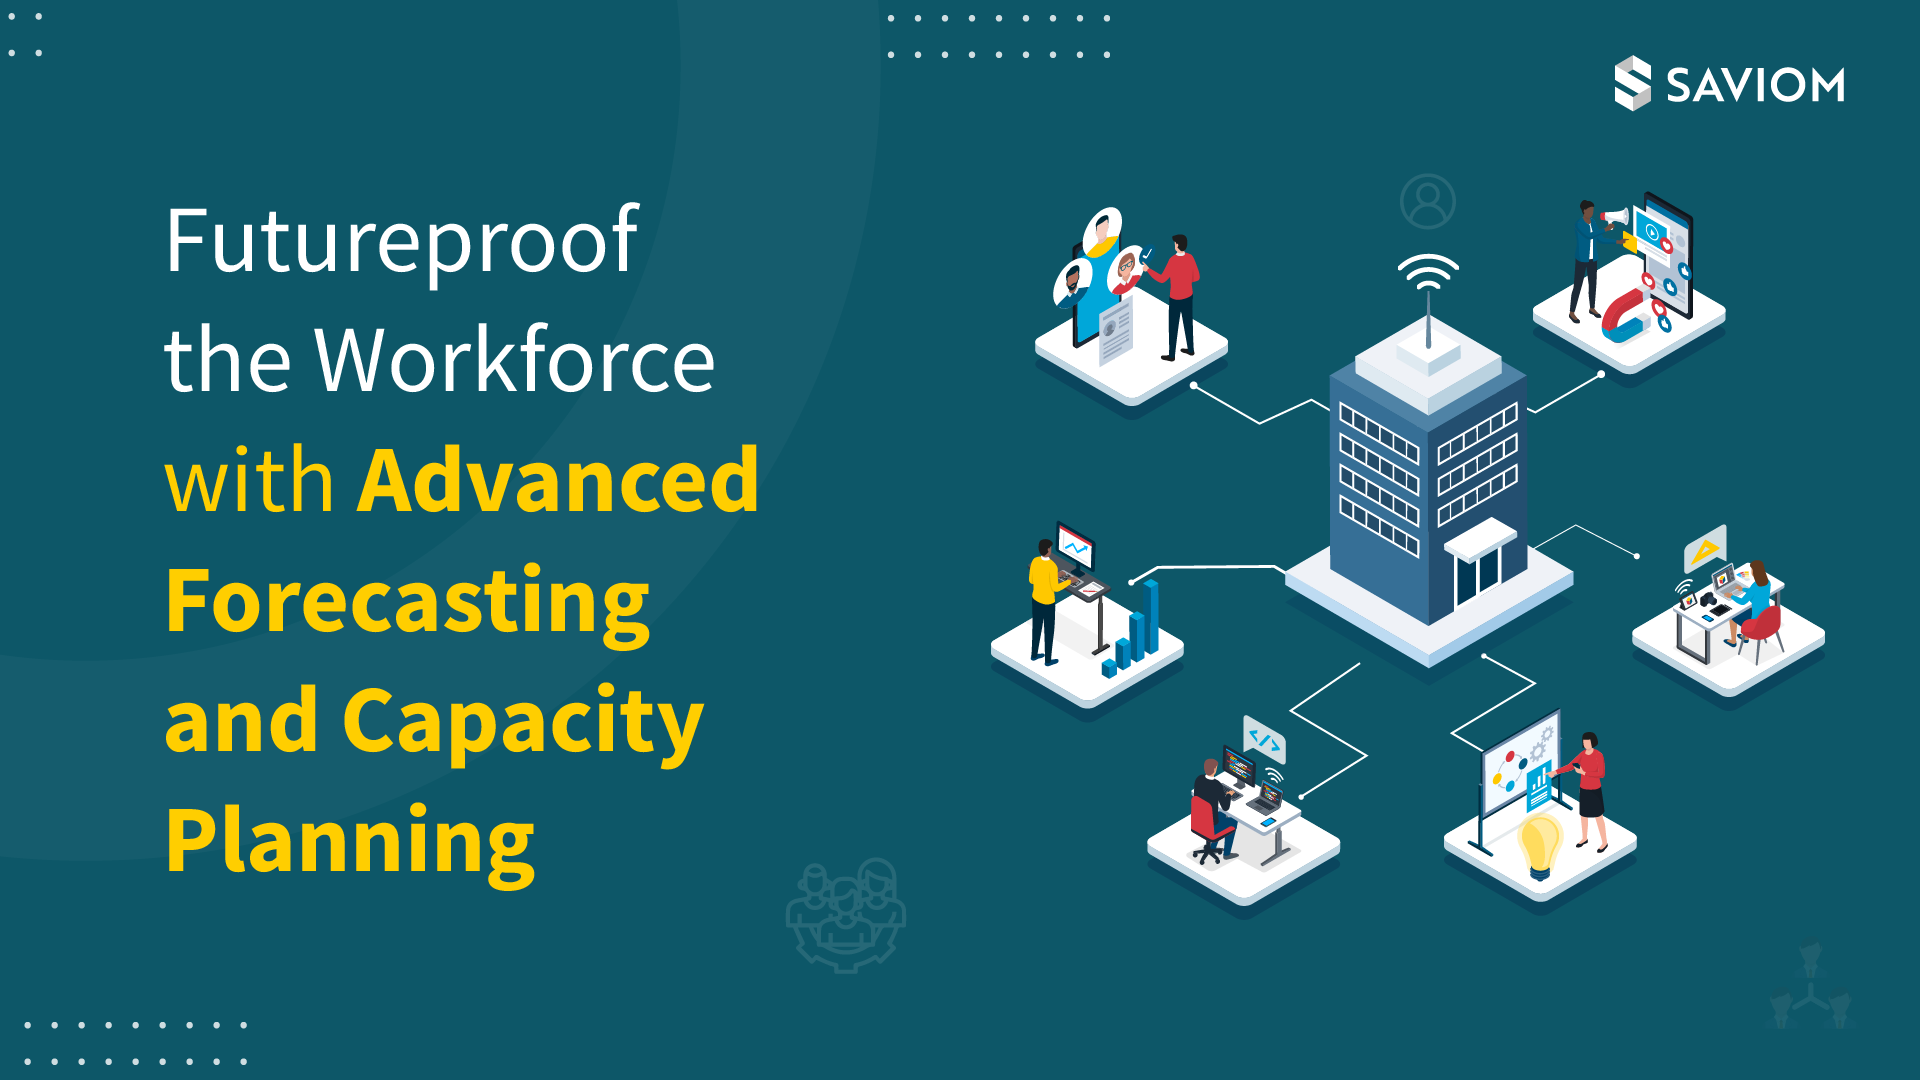 Futureproof the Workforce with Advanced Forecasting and Capacity Planning